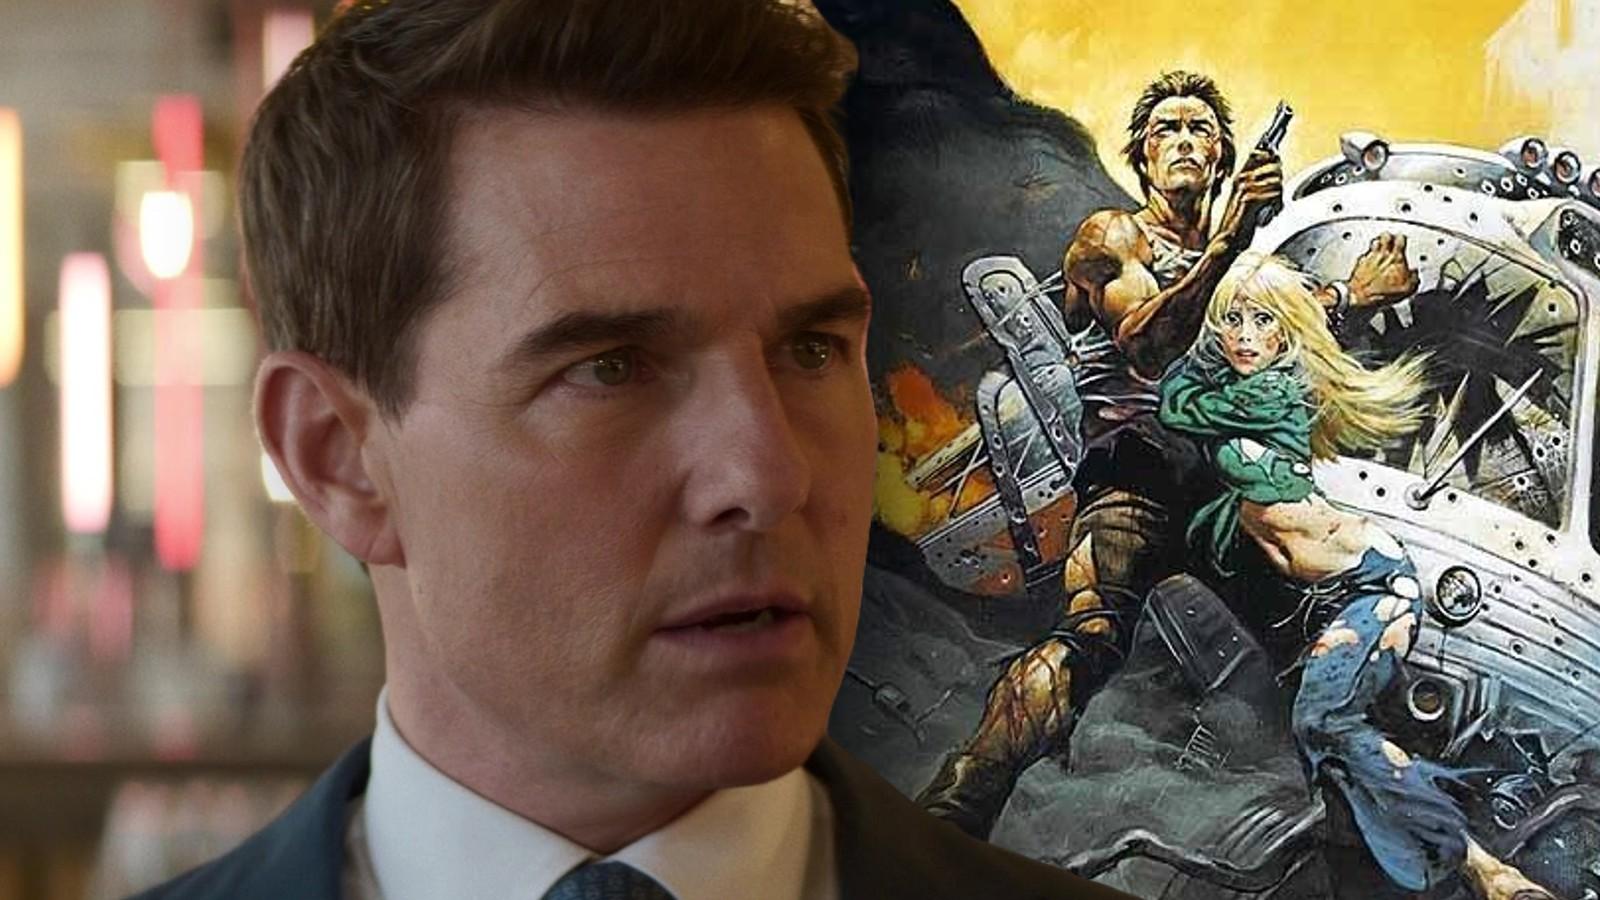 Tom Cruise in Mission: Impossible Dead Reckoning and a poster for The Gauntlet